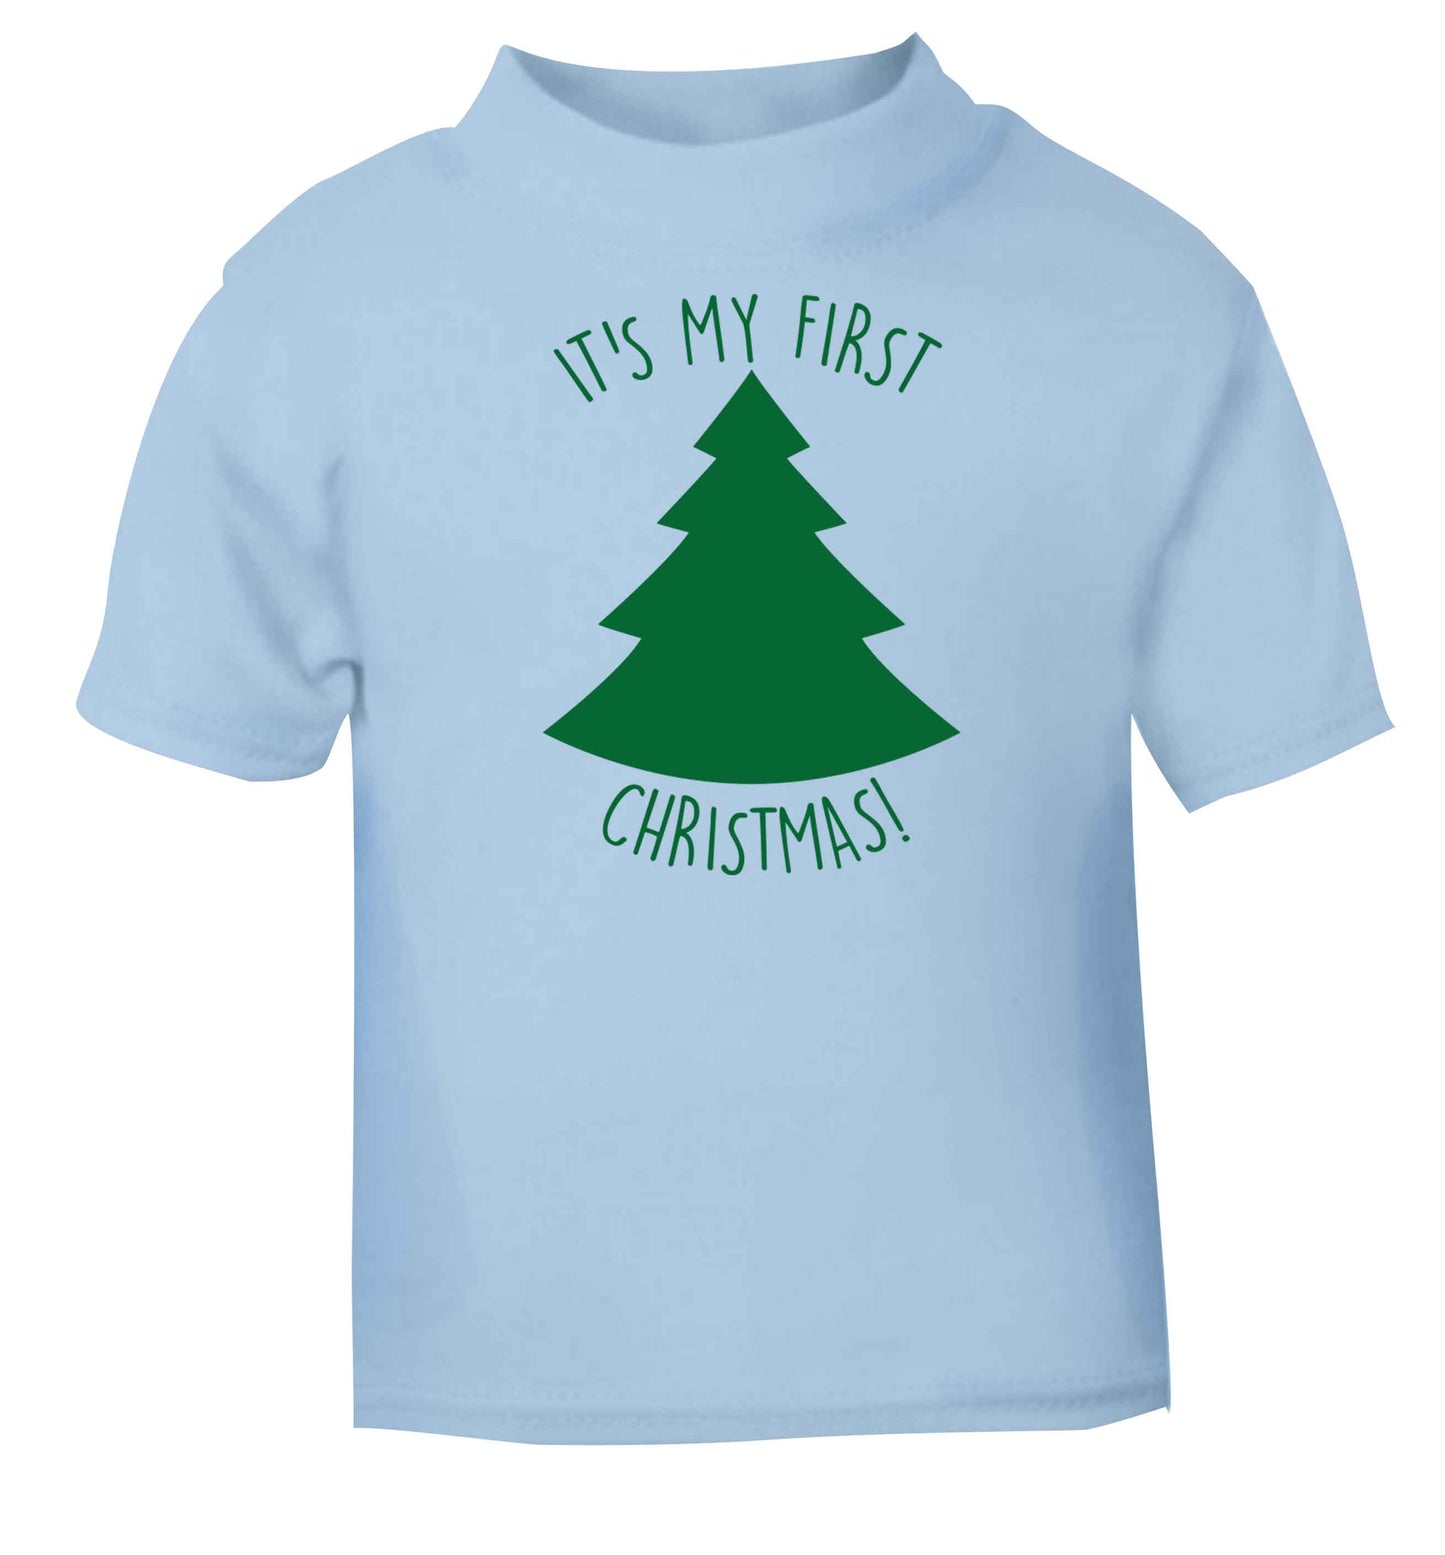 It's my first Christmas - tree light blue baby toddler Tshirt 2 Years